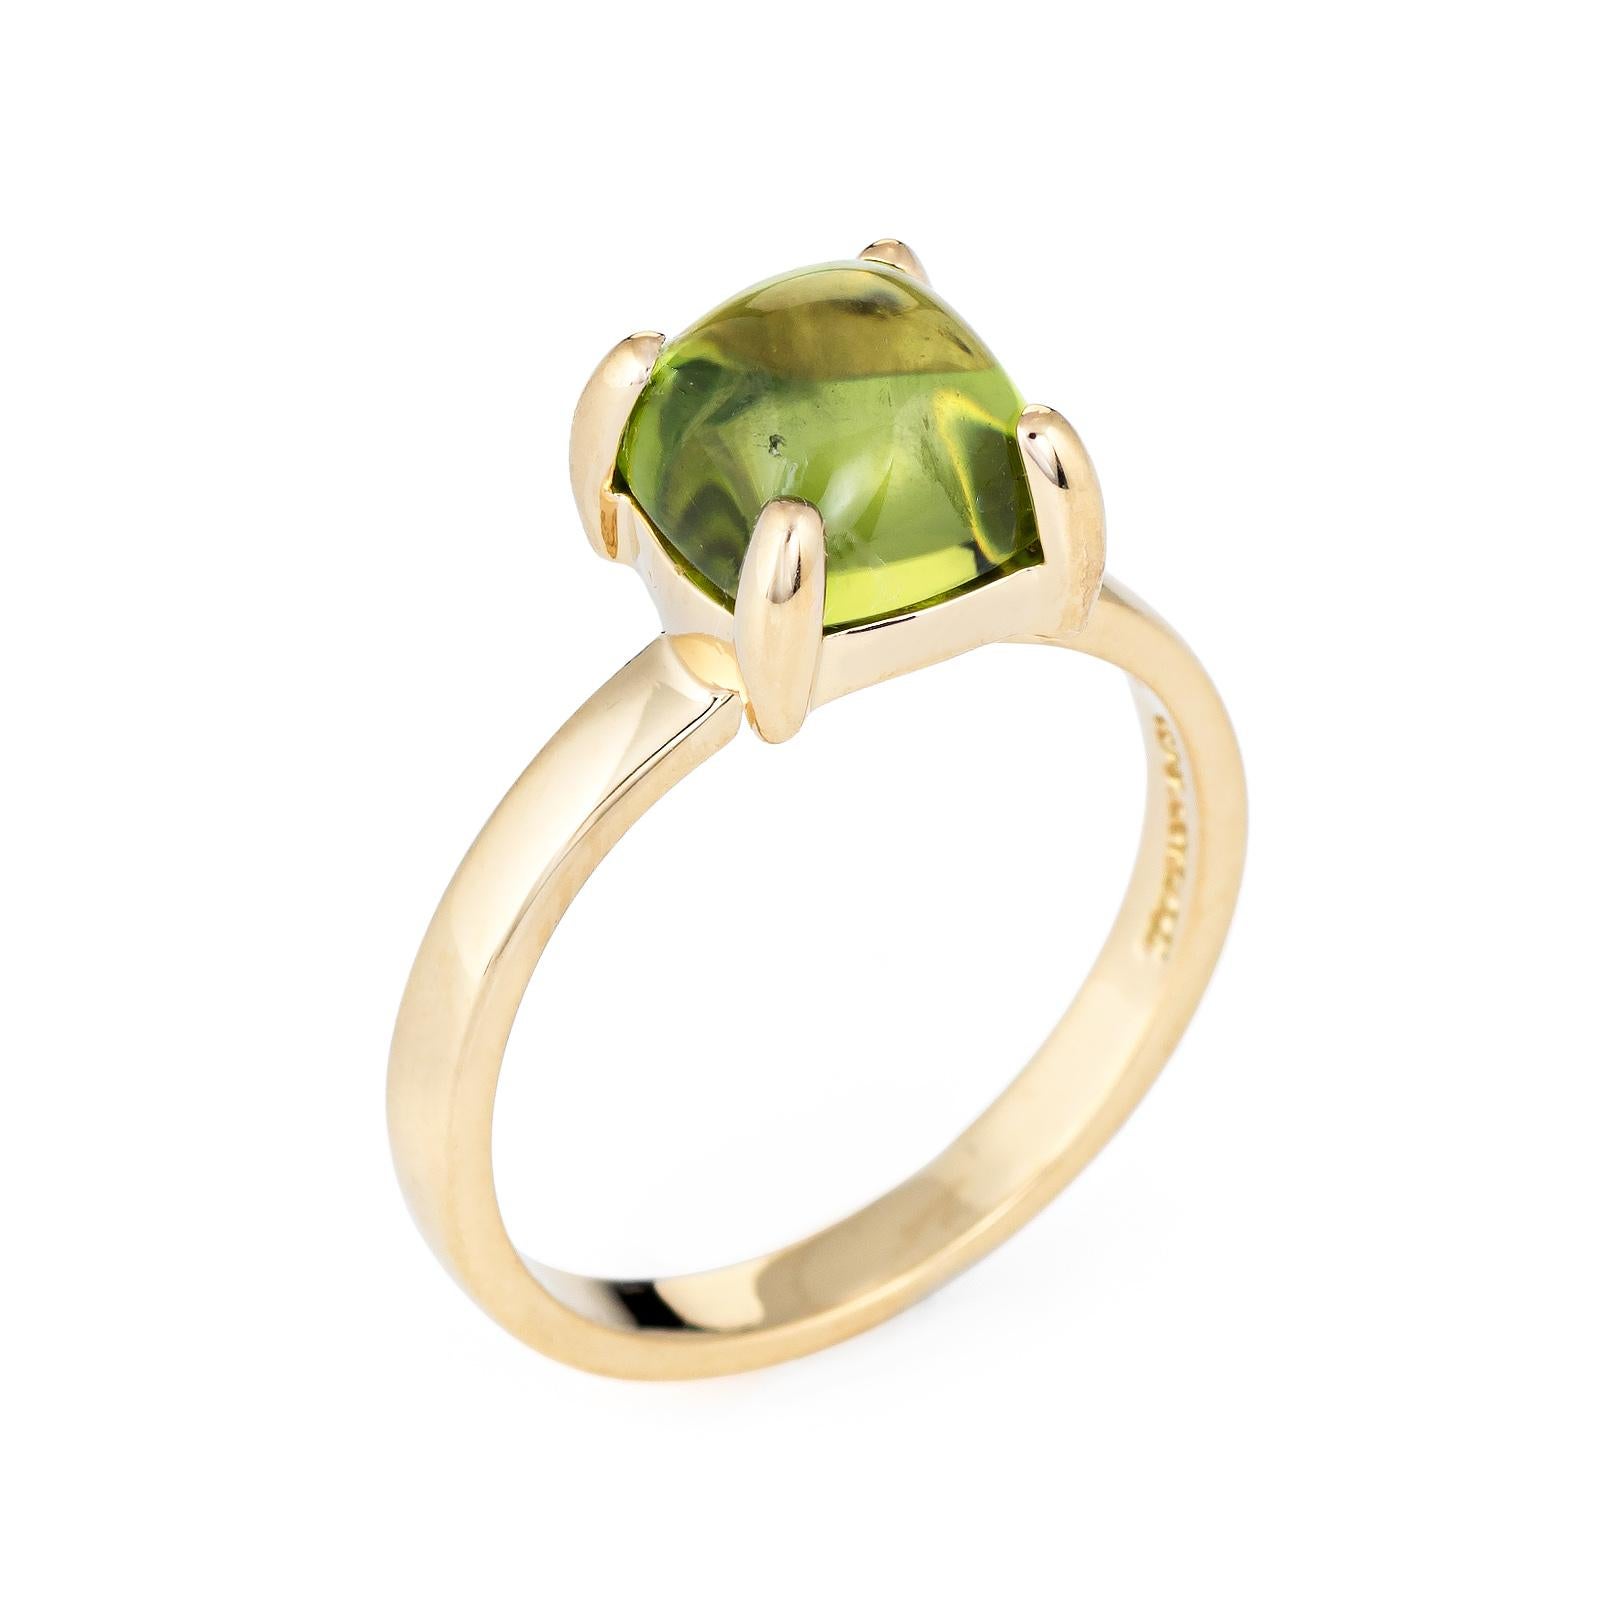 Pre owned Tiffany & Co Paloma Picasso sugar stack ring, crafted in 18 karat yellow gold.  

The peridot measures 7mm (estimated at 1.50 carats). The peridot is in excellent condition and free of cracks or chips.

The ring is in excellent condition.